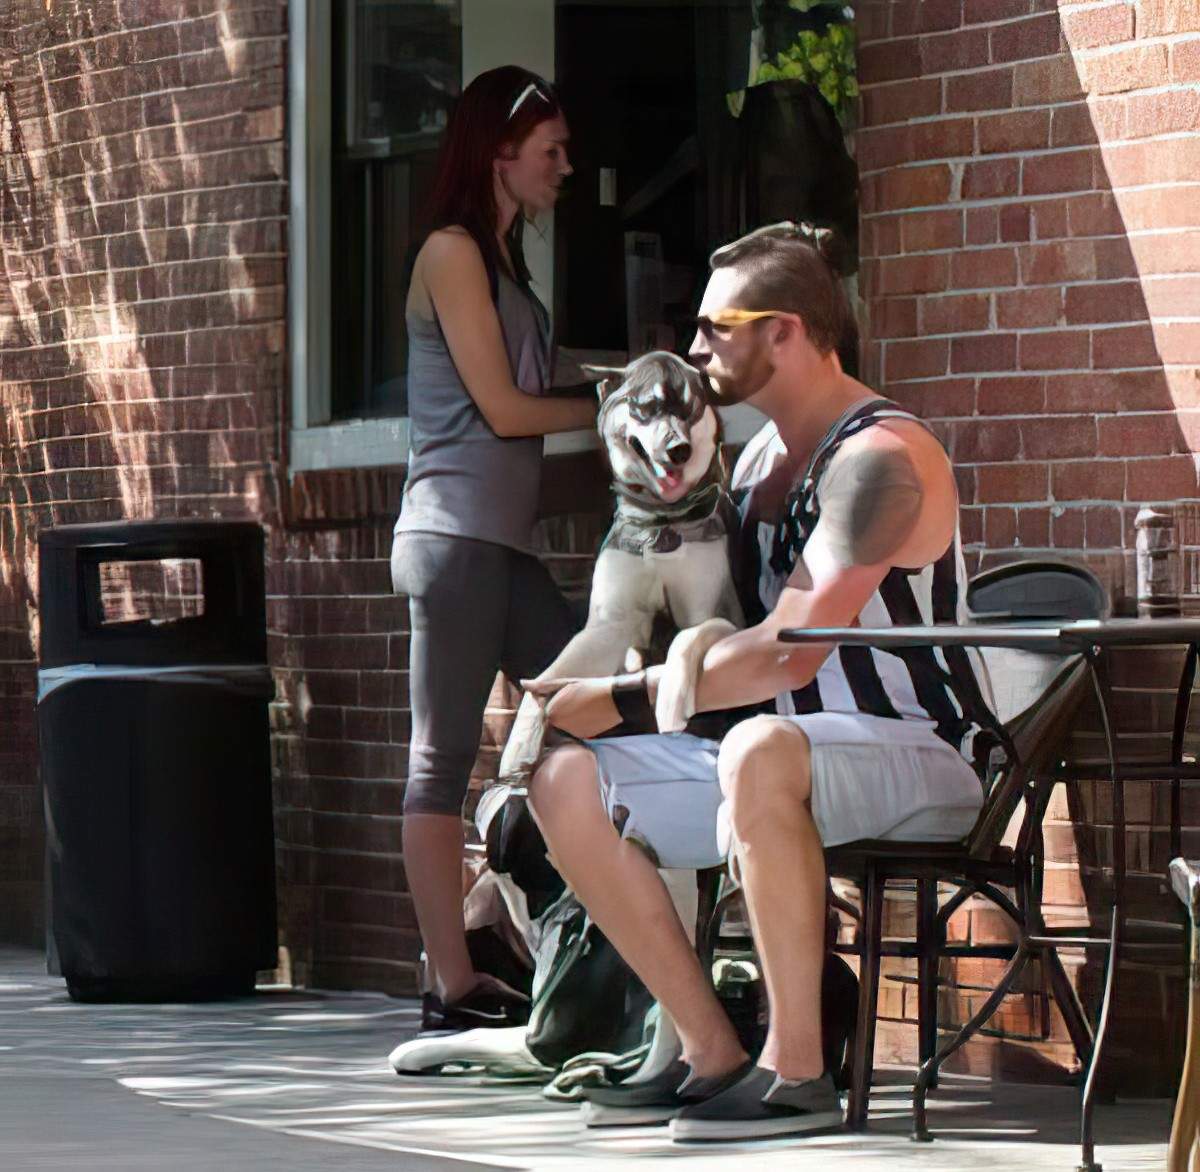 A person and a dog sitting on a chair outside a building